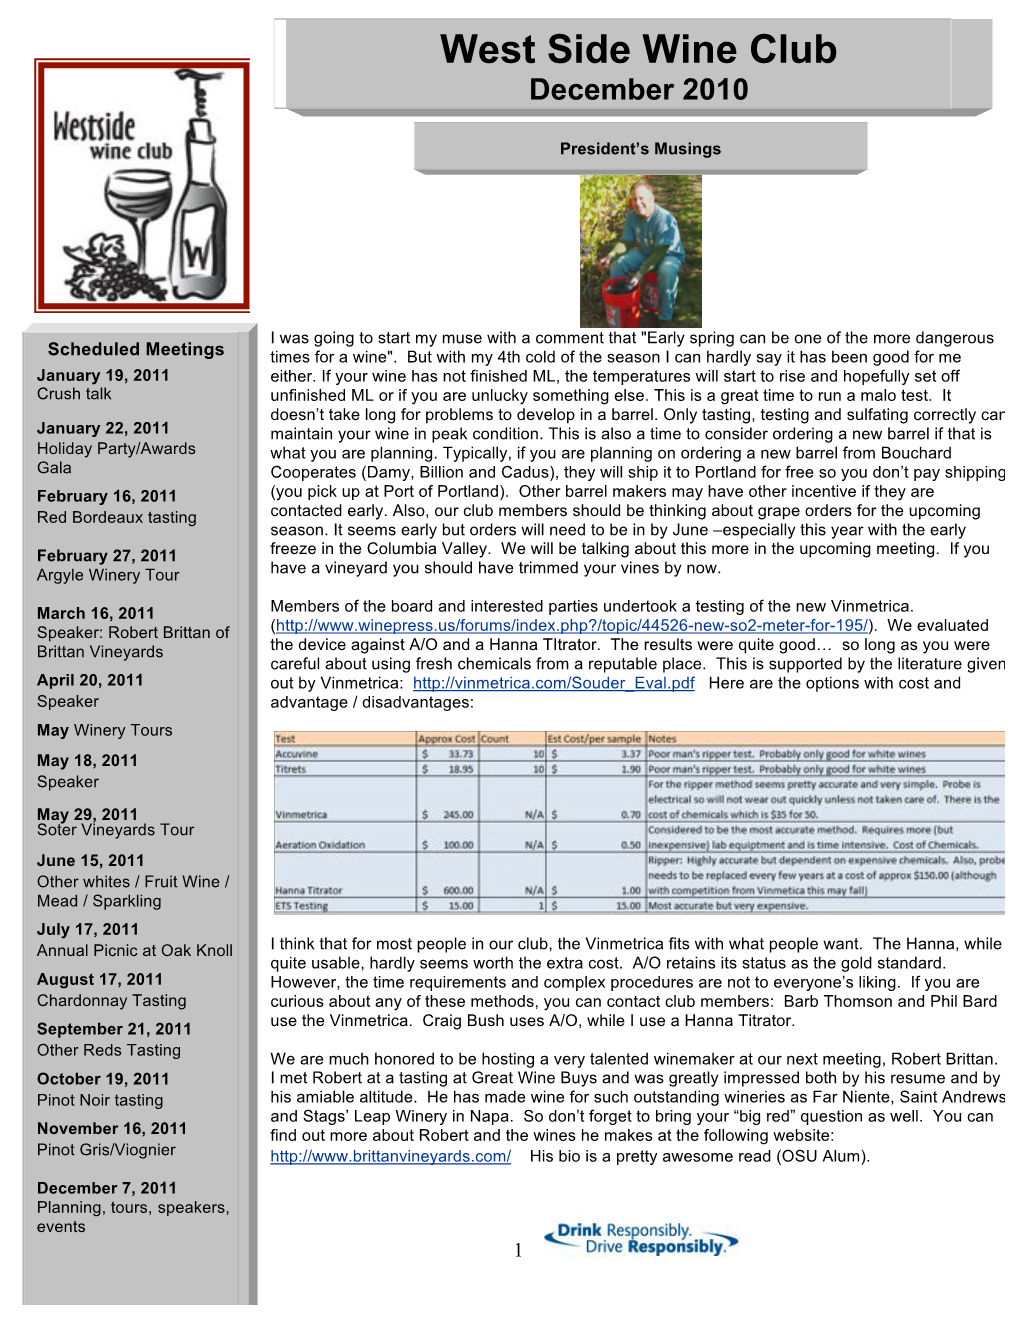 WSWC Newsletter Template